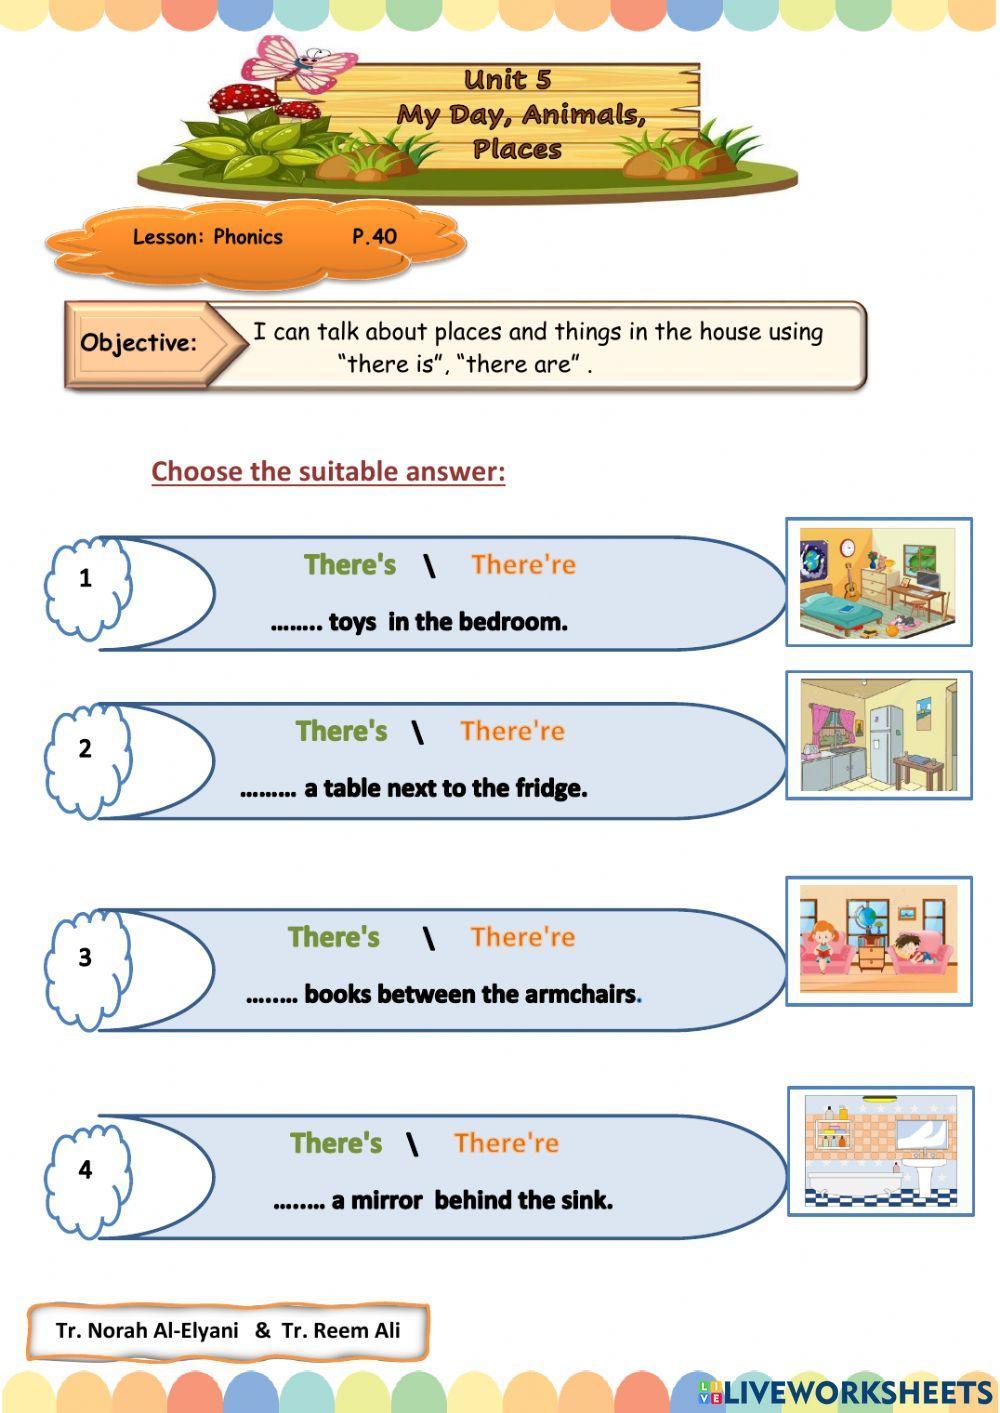 We Can4 U5 L4 I can talk about places and things in the house using“there is”, “there are” .